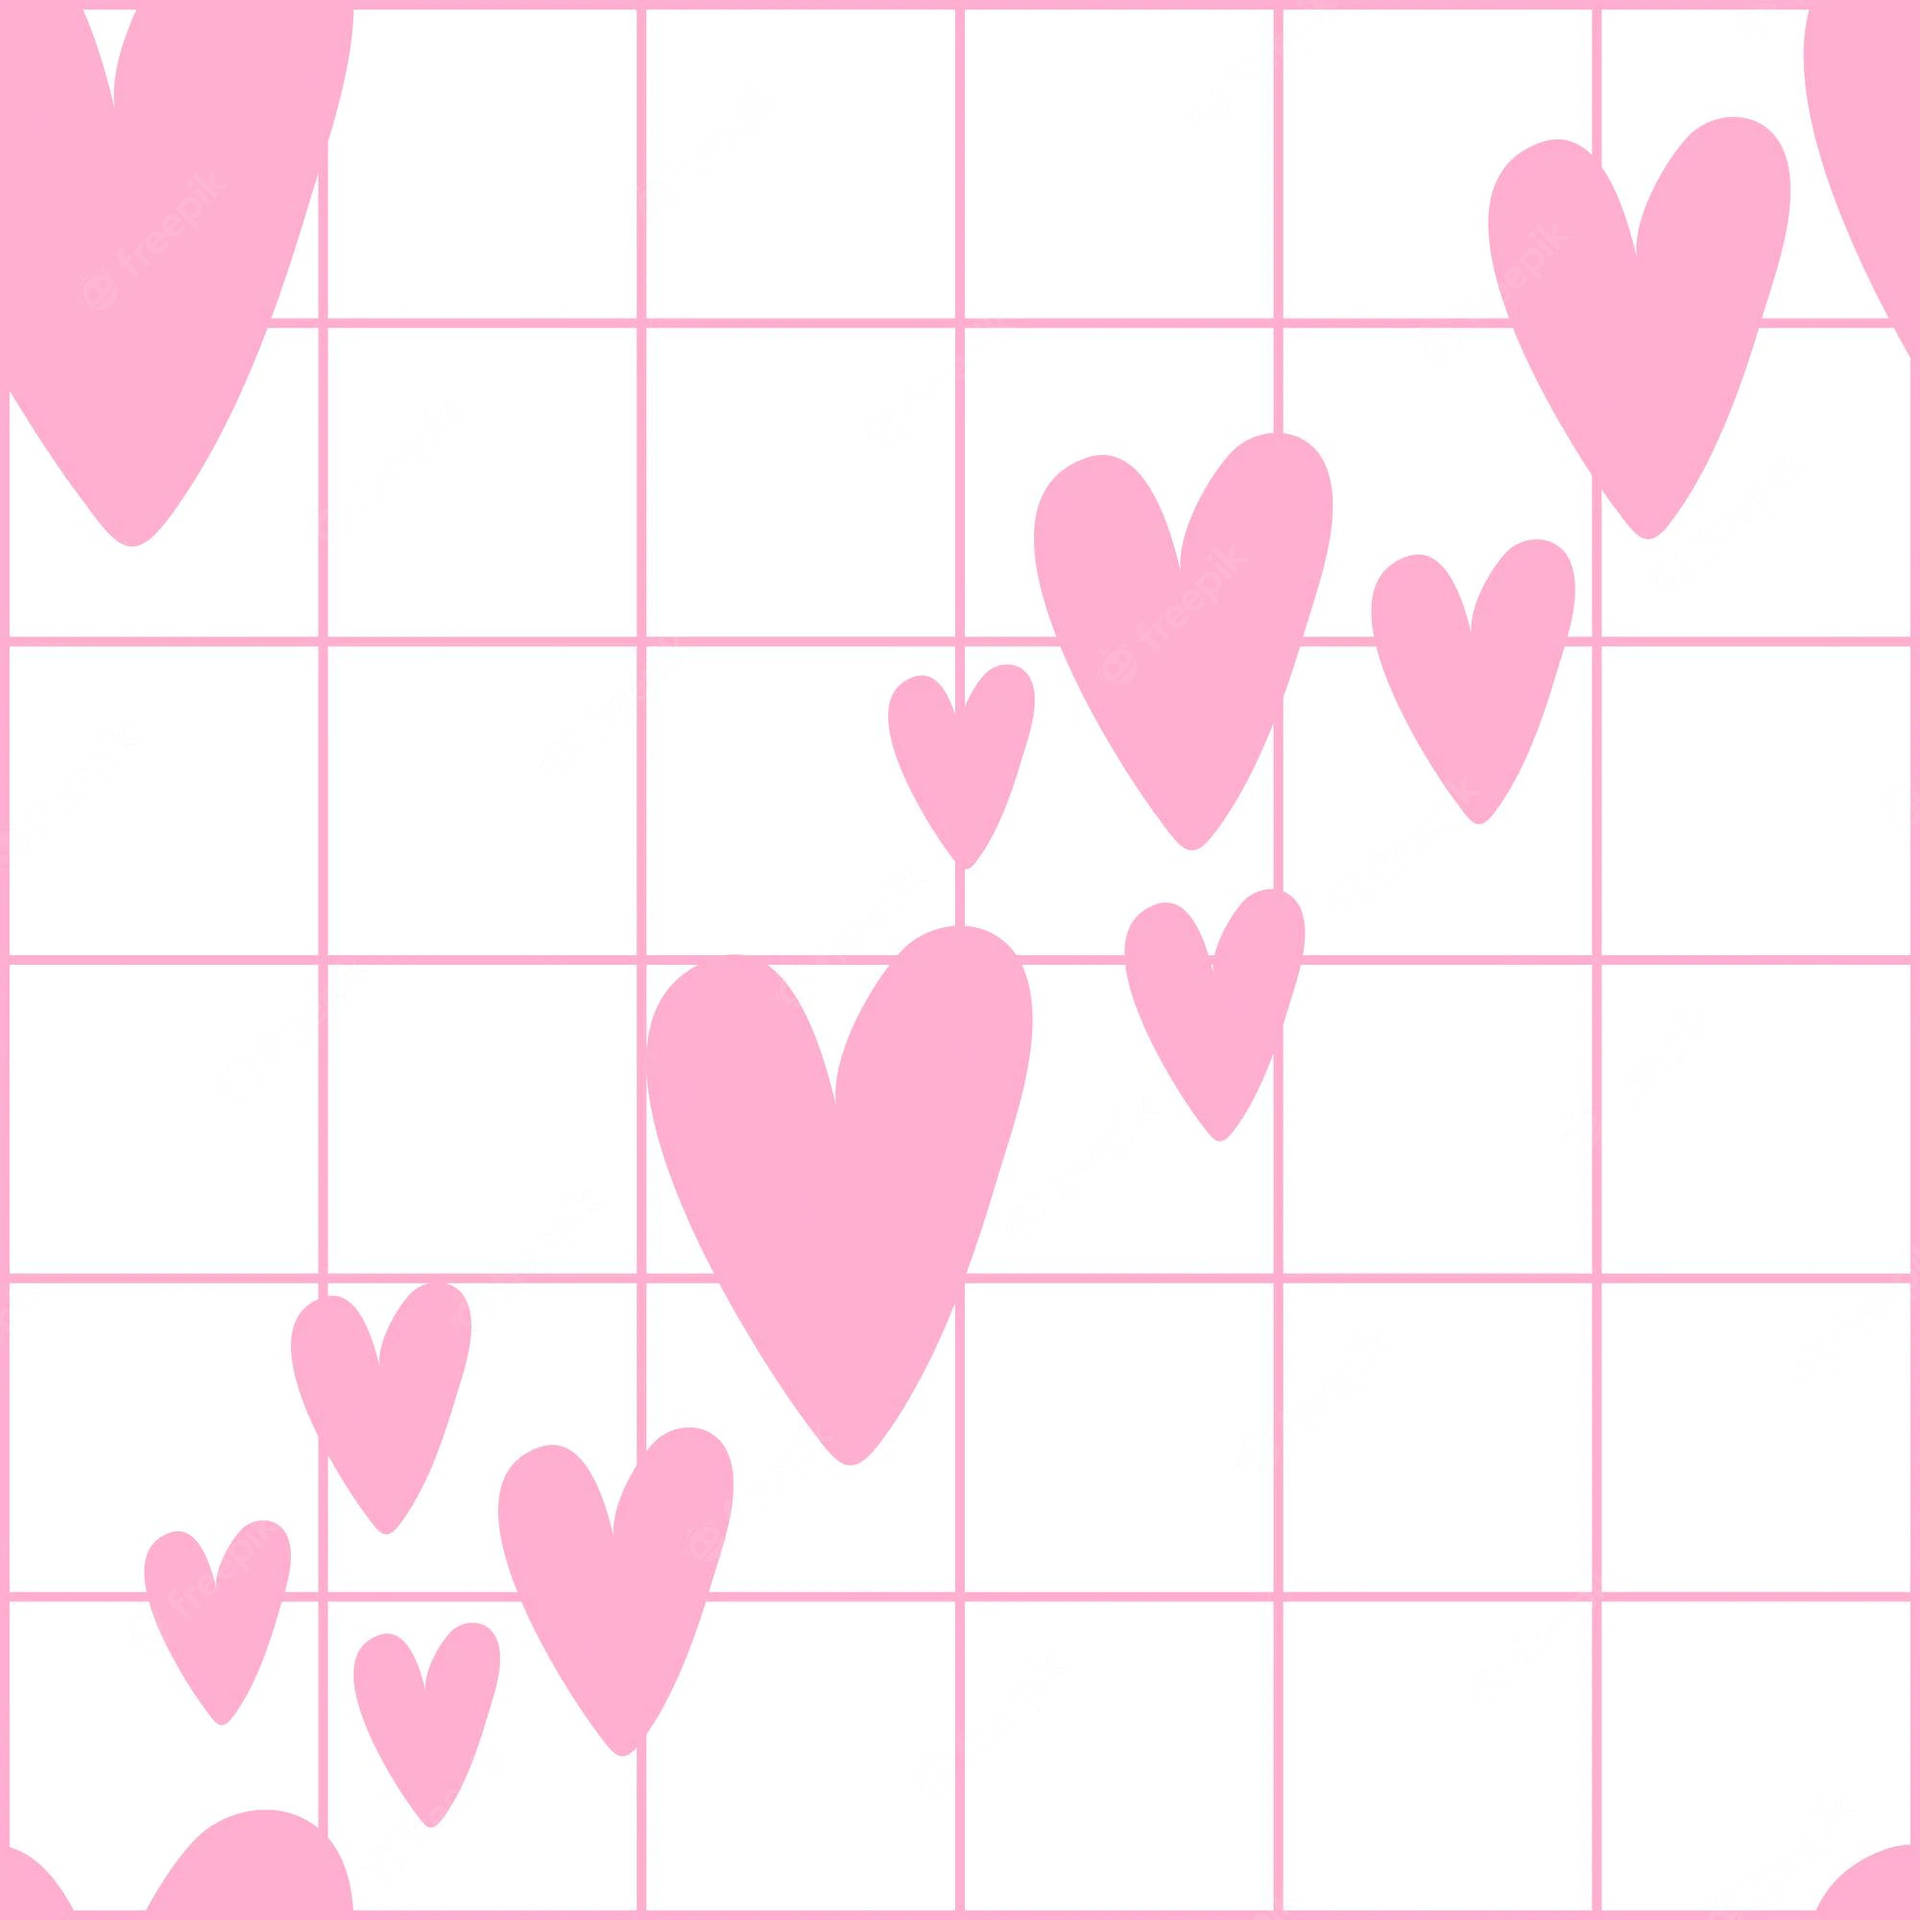 White And Pink With Hearts Grid Aesthetic